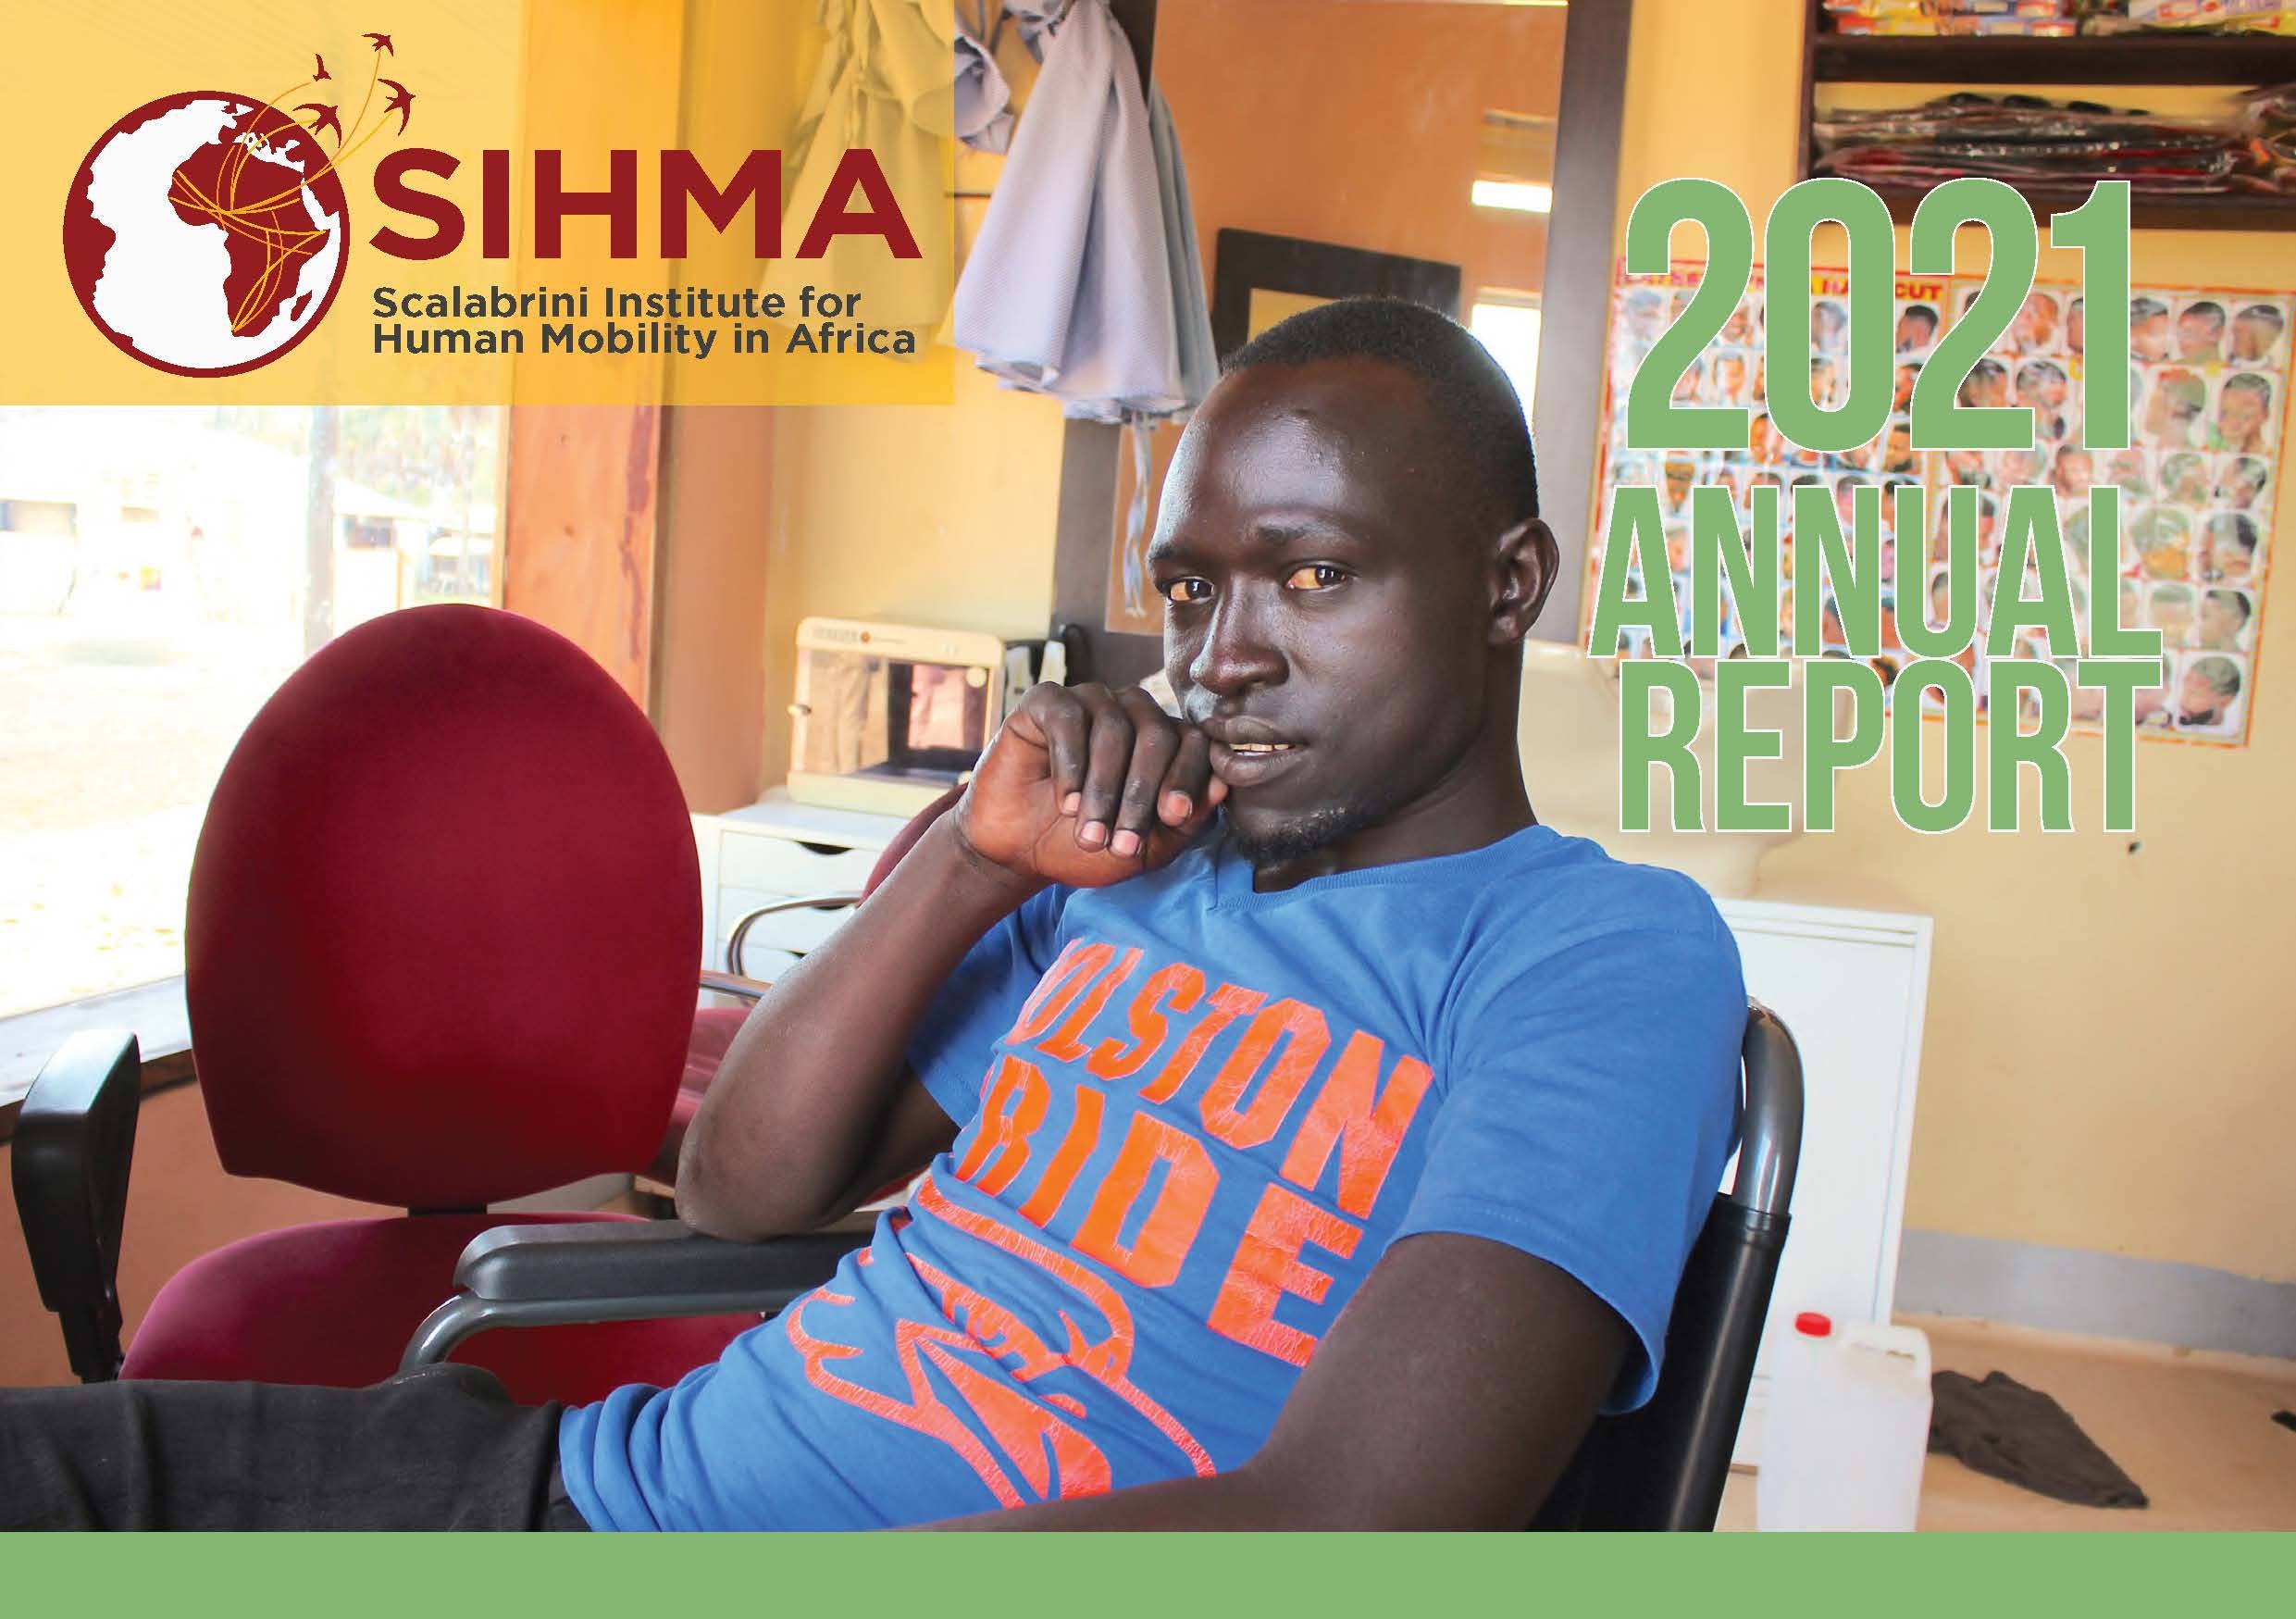 https://www.sihma.org.za/photos/shares/SIHMA Annual Report 2021 Cover.jpg